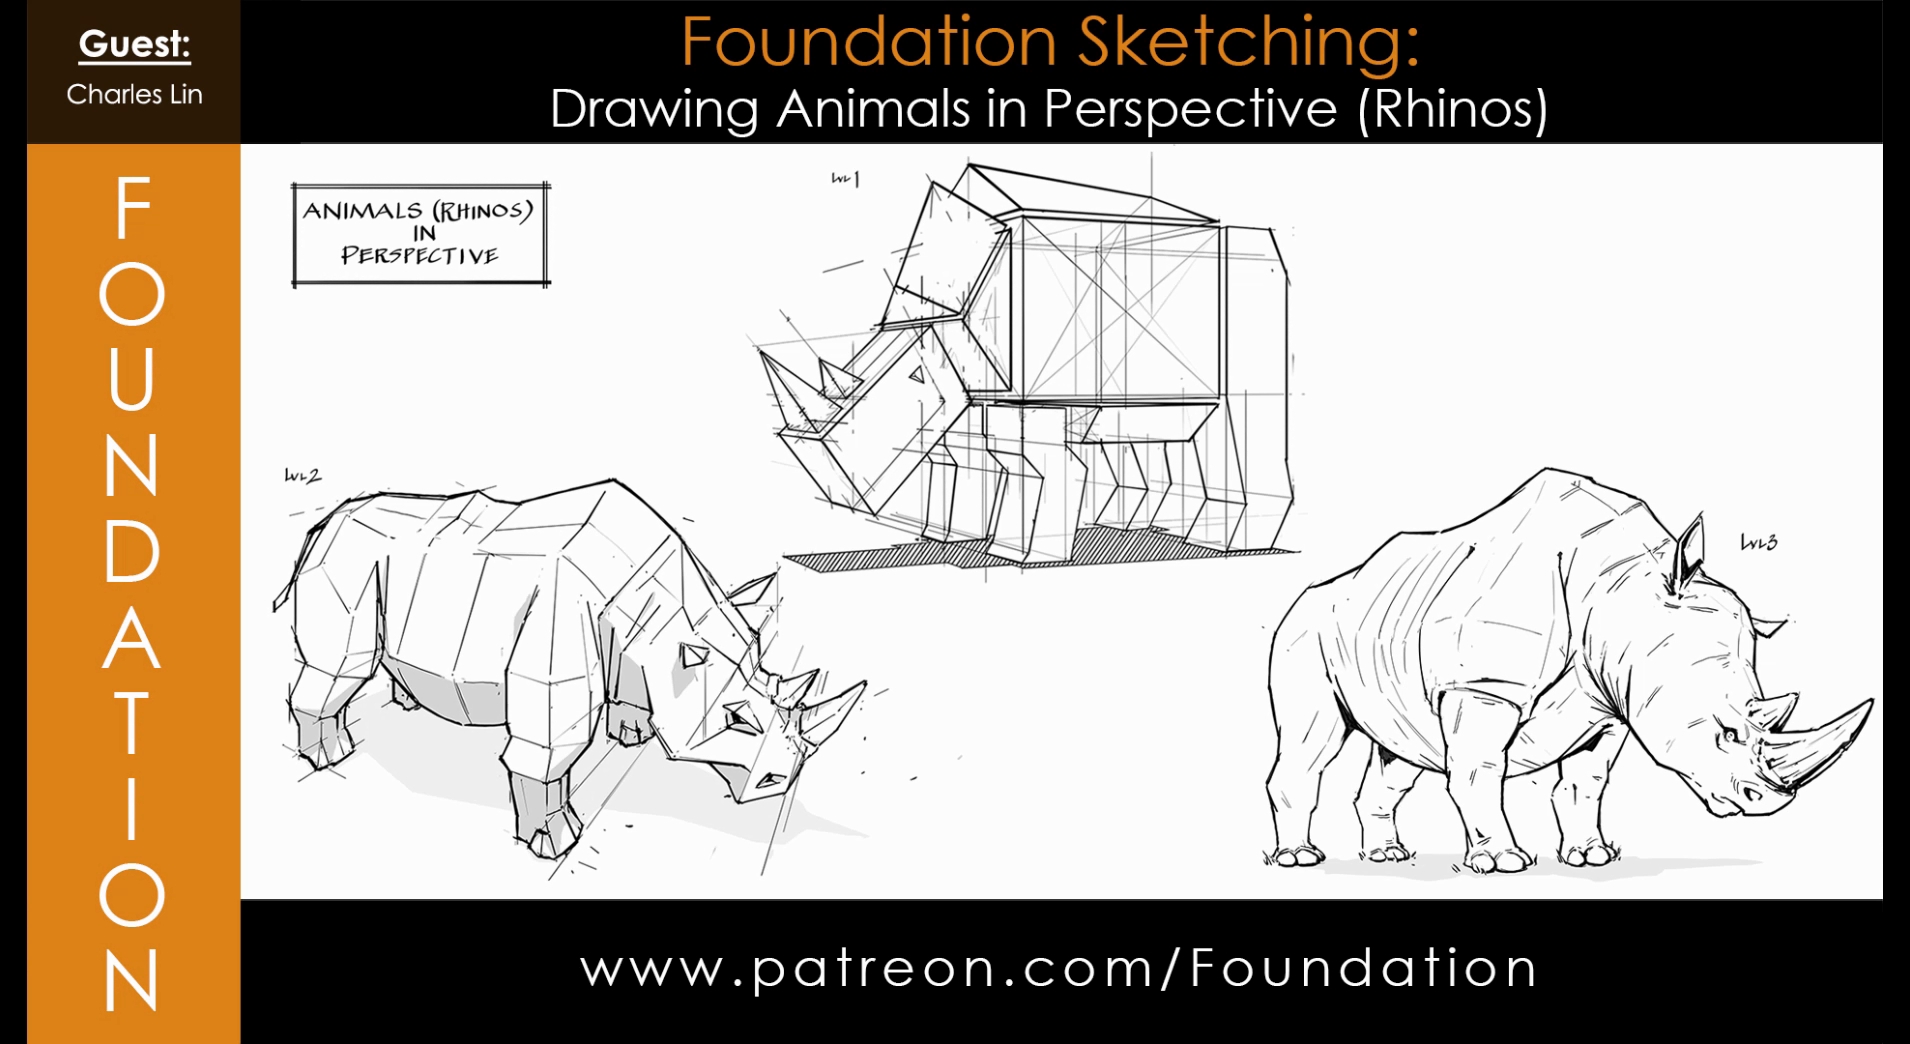 Foundation Sketching – Drawing Animals in Perspective (Rhinos) with Charles Lin